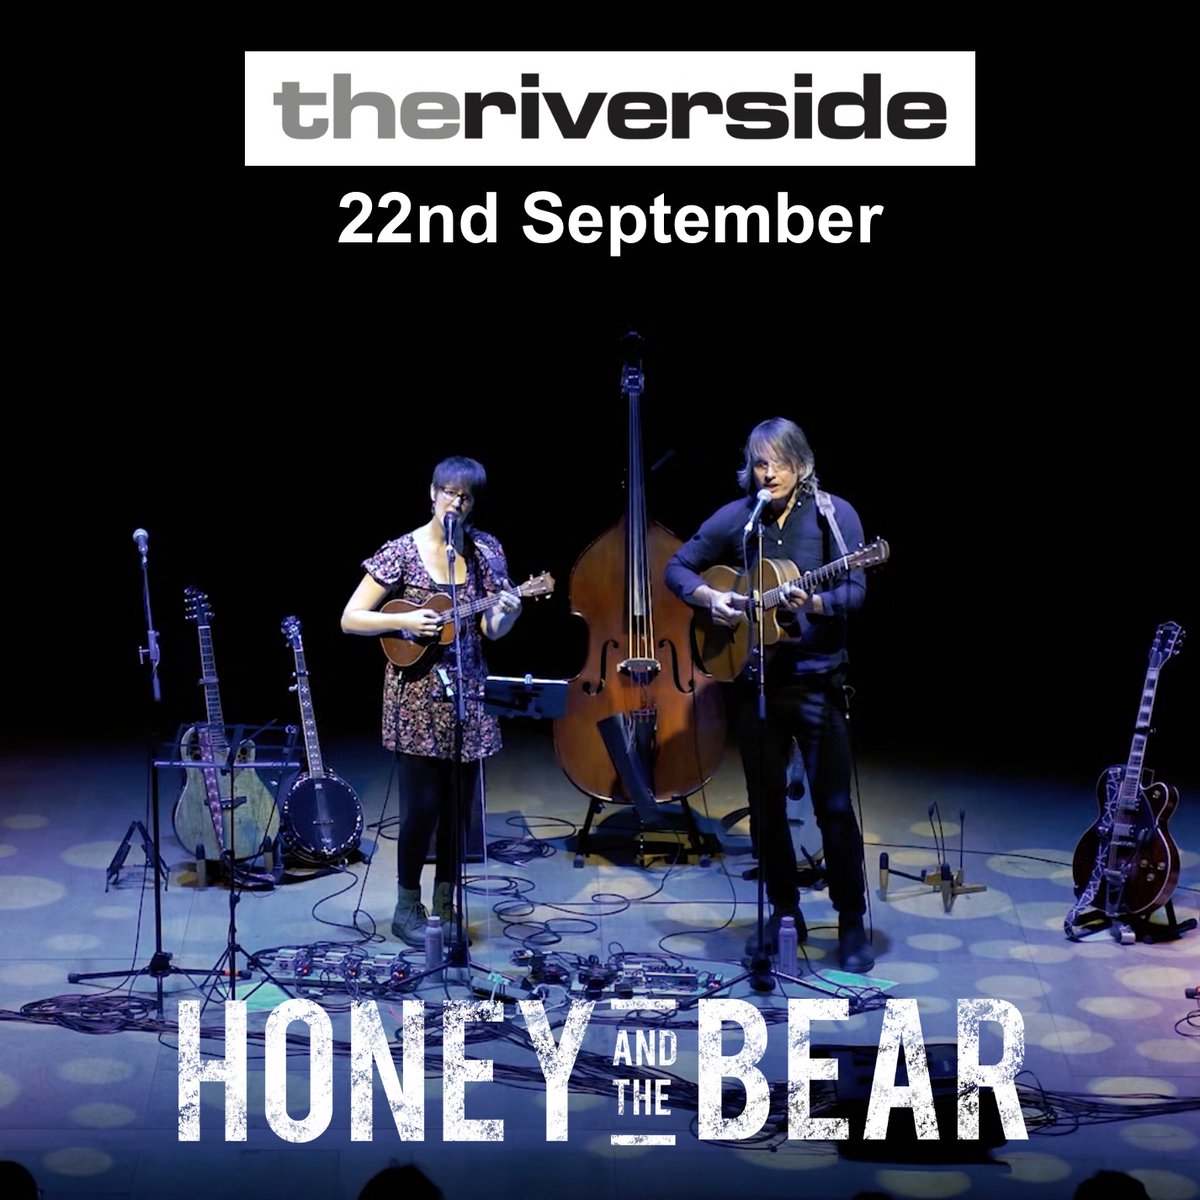 Hey Suffolk friends! in the second part of our 10 year anniversary tour this autumn we will be bringing our band show to the @_theriverside in Woodbridge. Hope you can come and join us as we celebrate a journey through the 3 albums with all the guests - honeyandthebear.co.uk